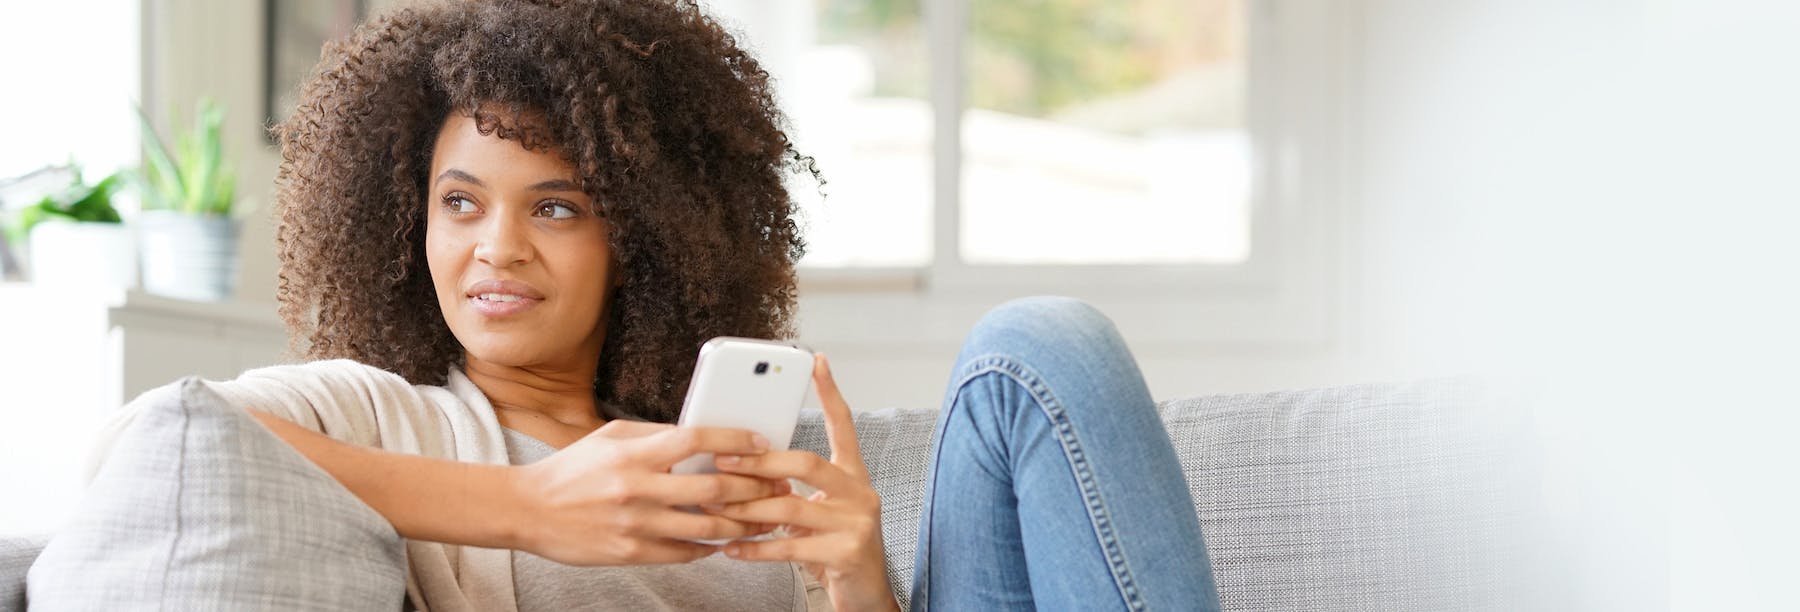 A woman on her mobile device sitting on a couch 